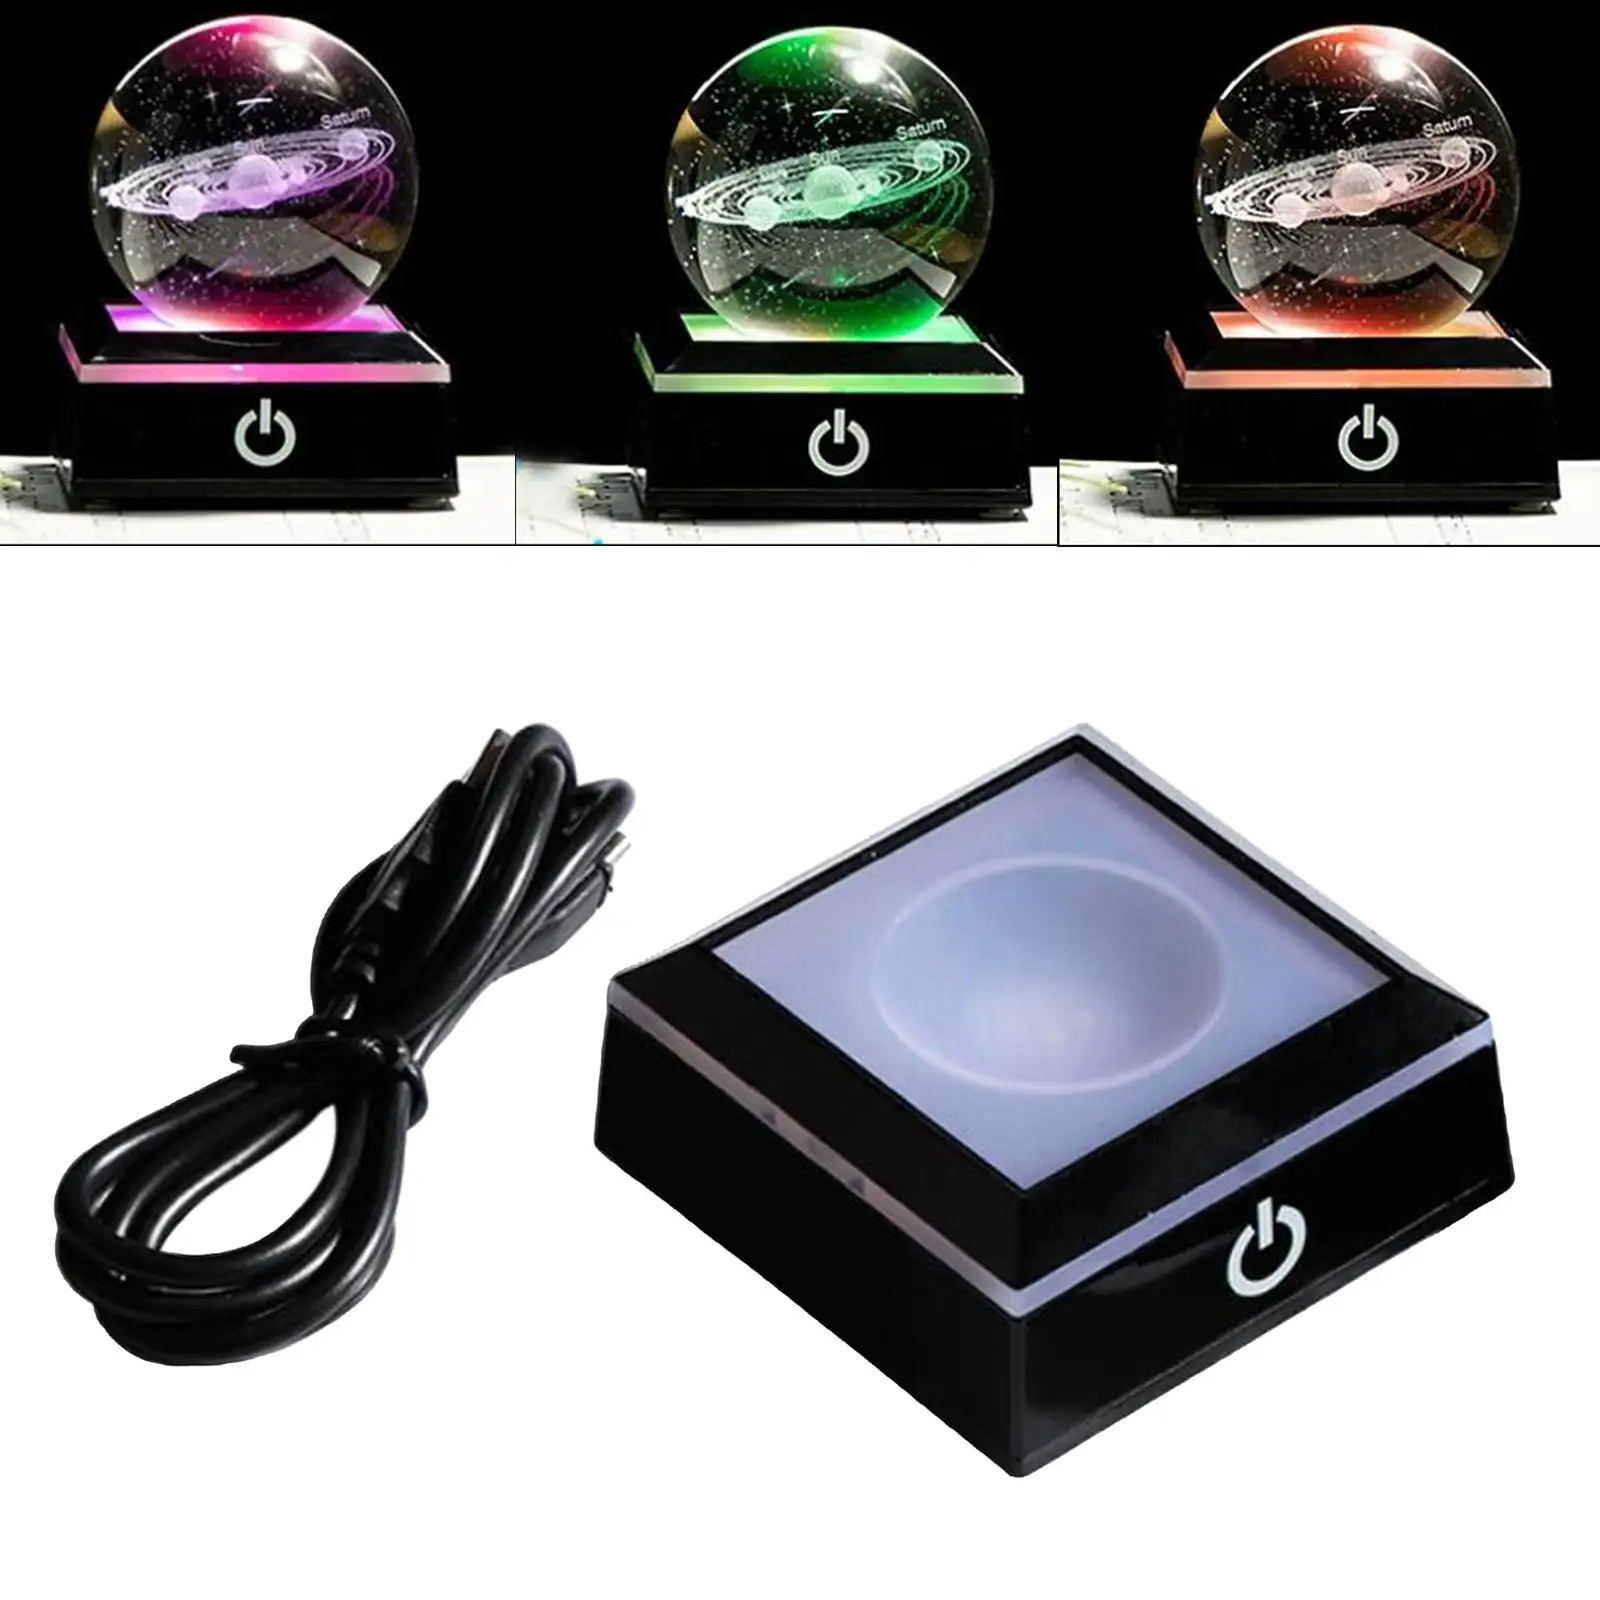 LED light base display stand lamps craft for crystals glass resin